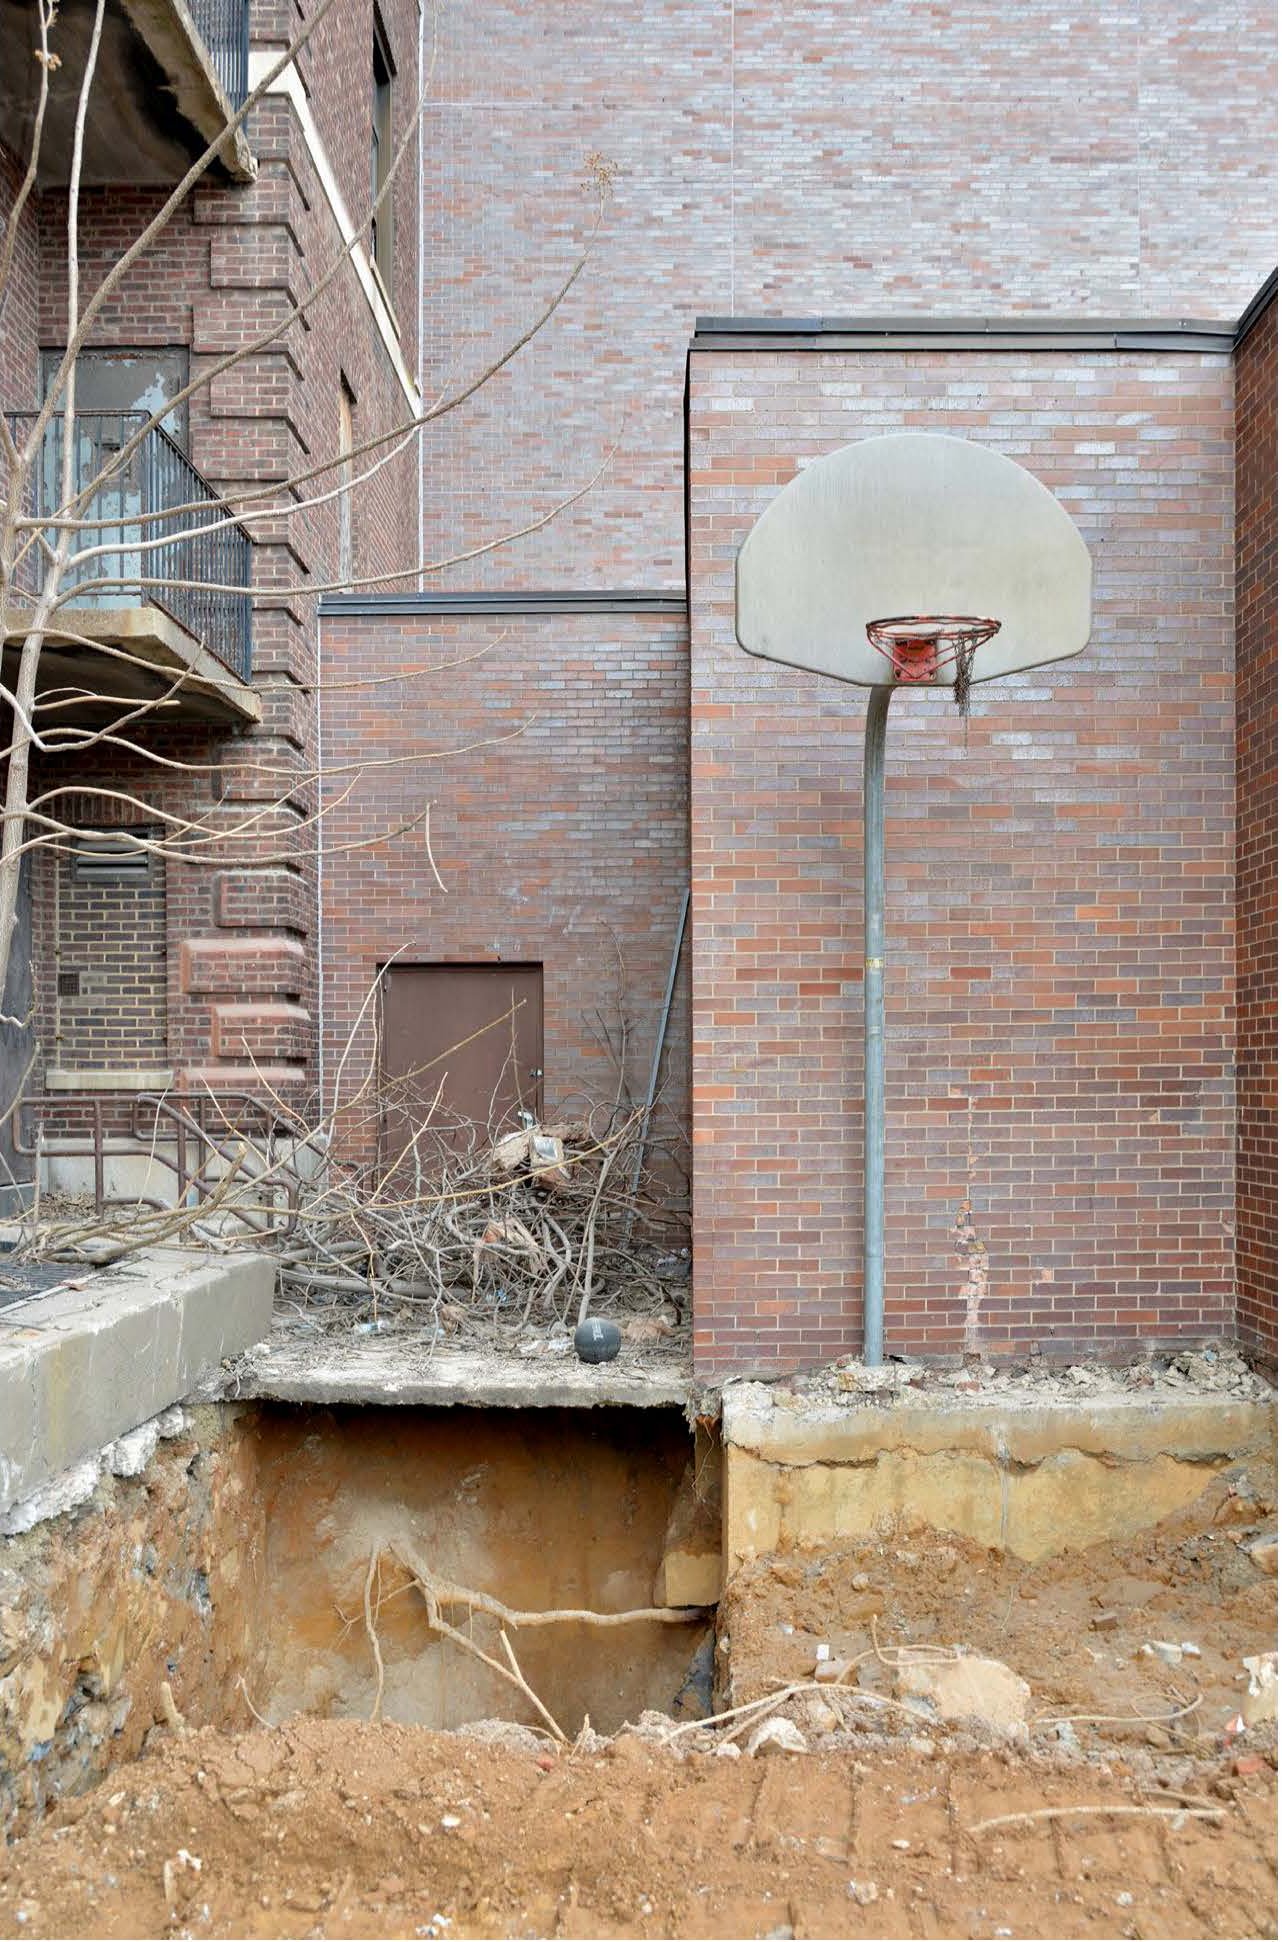  Commencement Detail, Photograph (Mt. Sinai Basketball Hoop), 2019  pigment print  18 x 12 inches image on 20 x 16 inches paper 